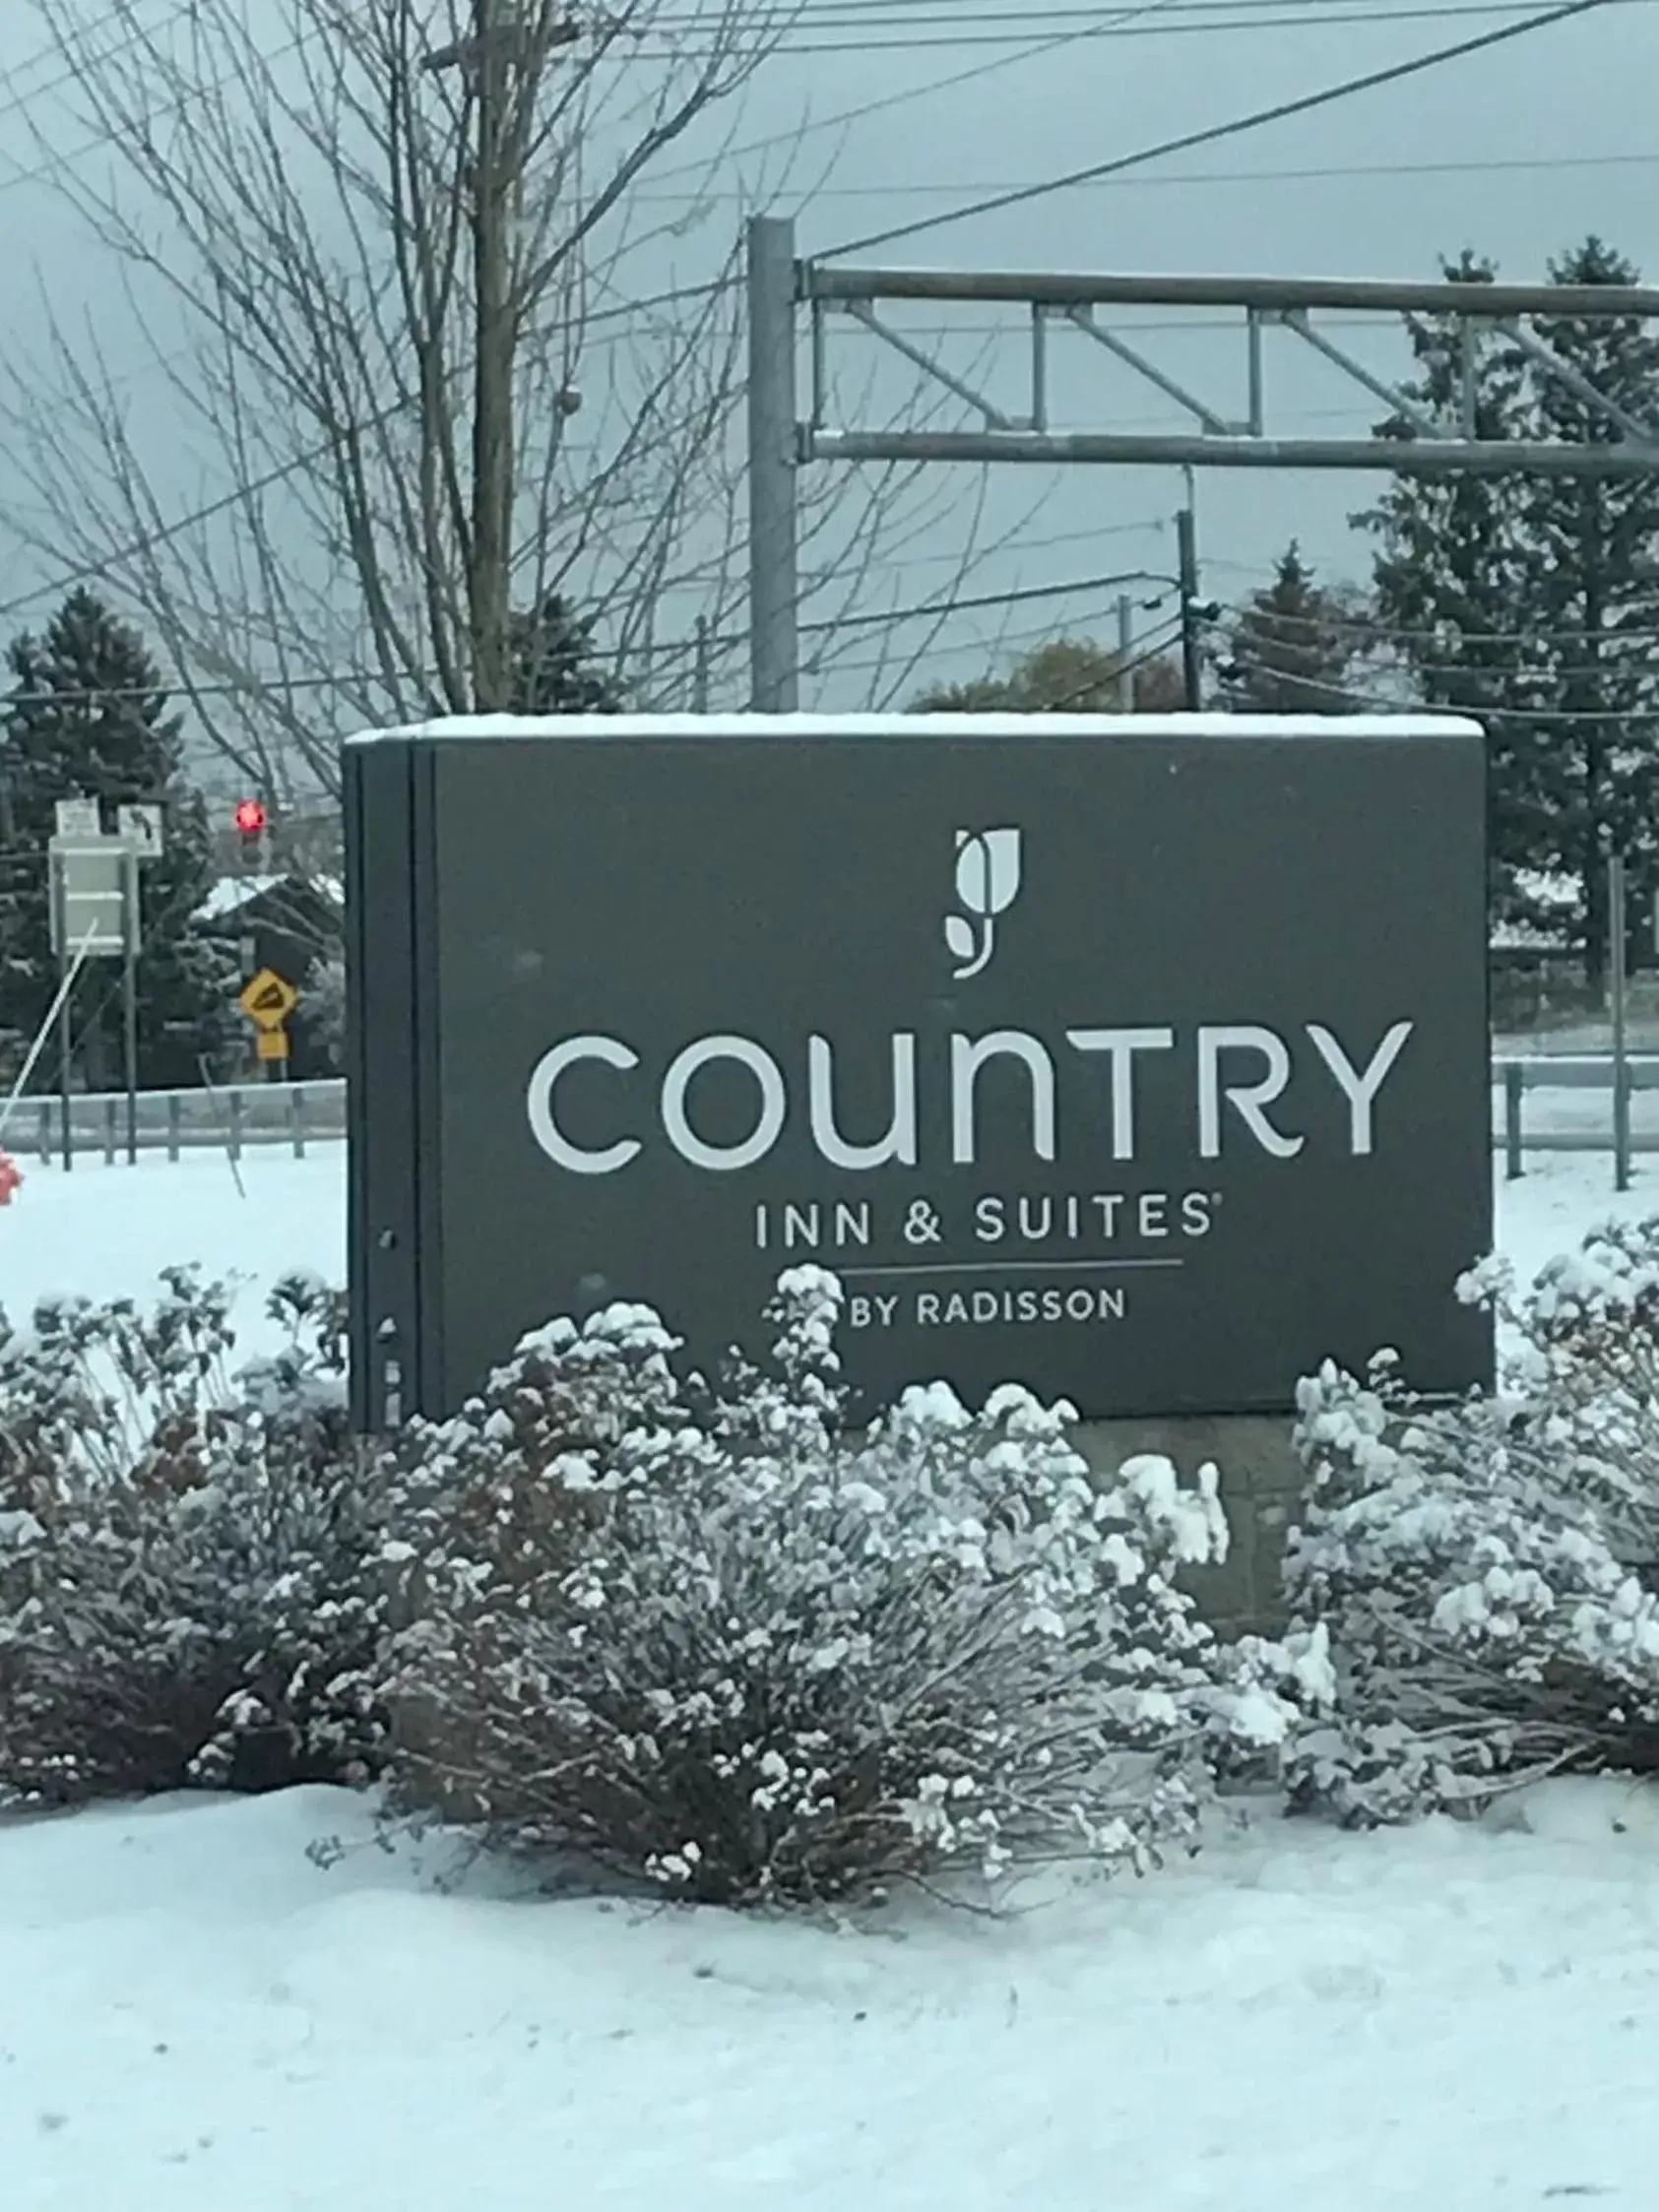 Property building, Winter in Country Inn & Suites by Radisson, Ithaca, NY